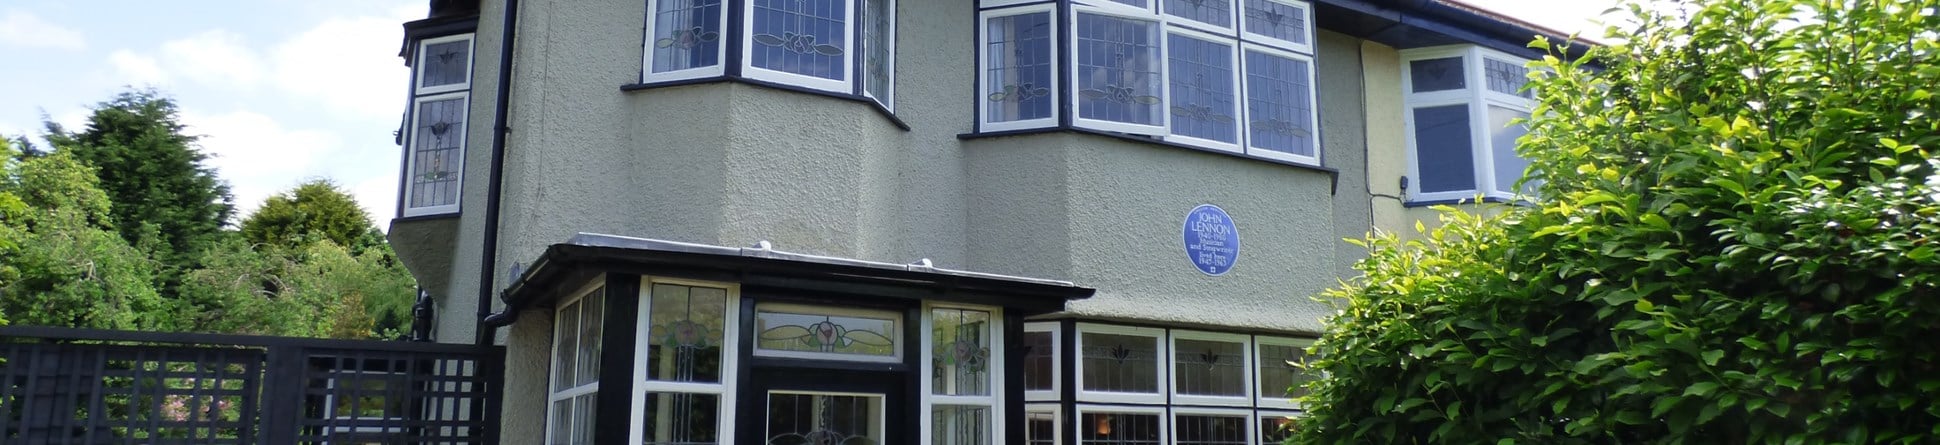 The front exterior of a semi-detached house in Liverpool with a Blue Plaque celebrating the singer, songwriter, musician and peace activist John Lennon